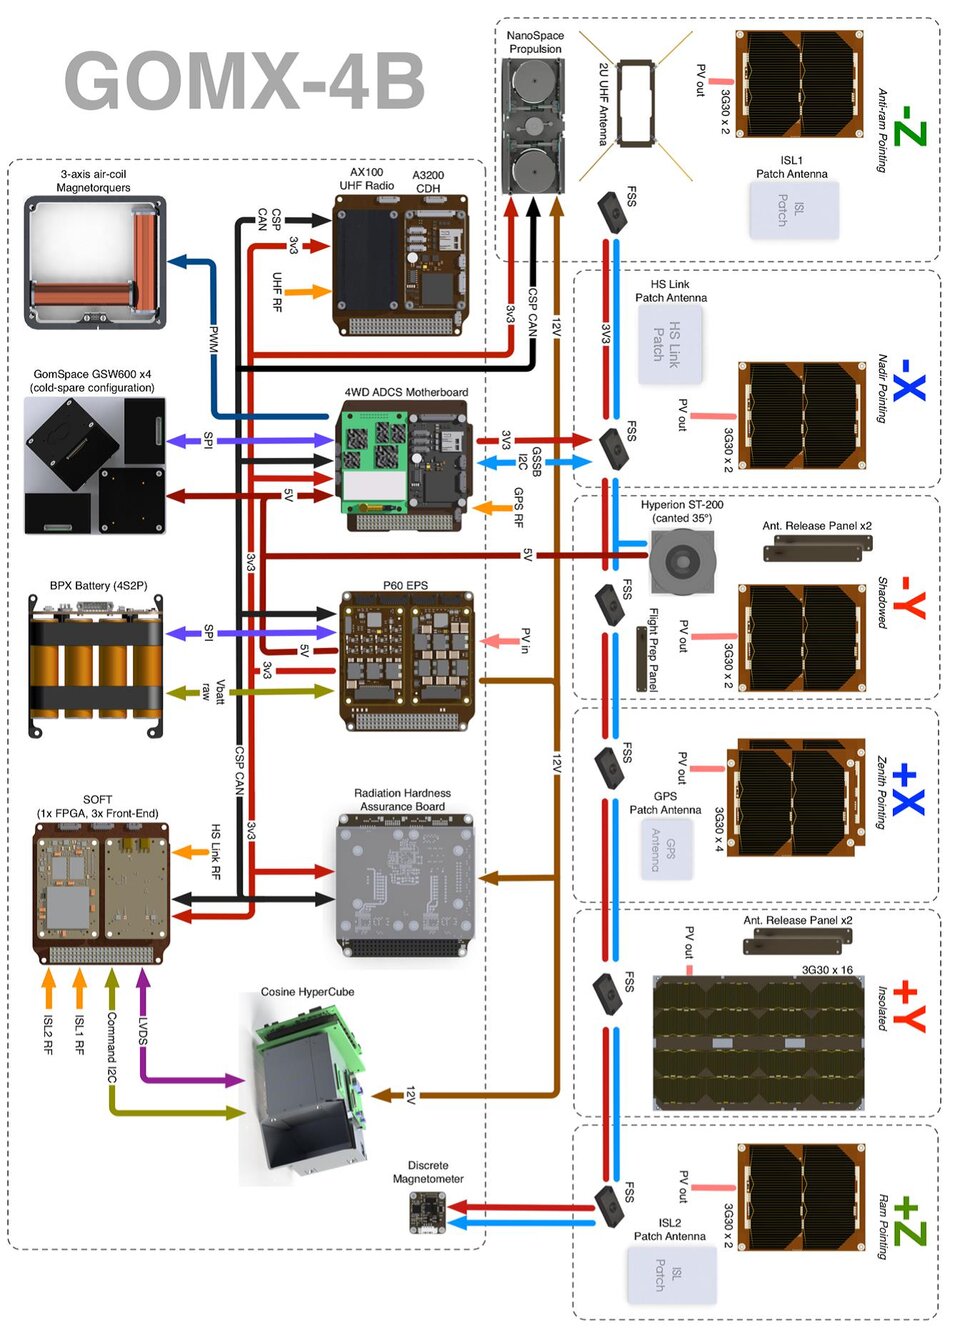 Complete GOMX-4B architecture: full bus layouts for both the electrical and data